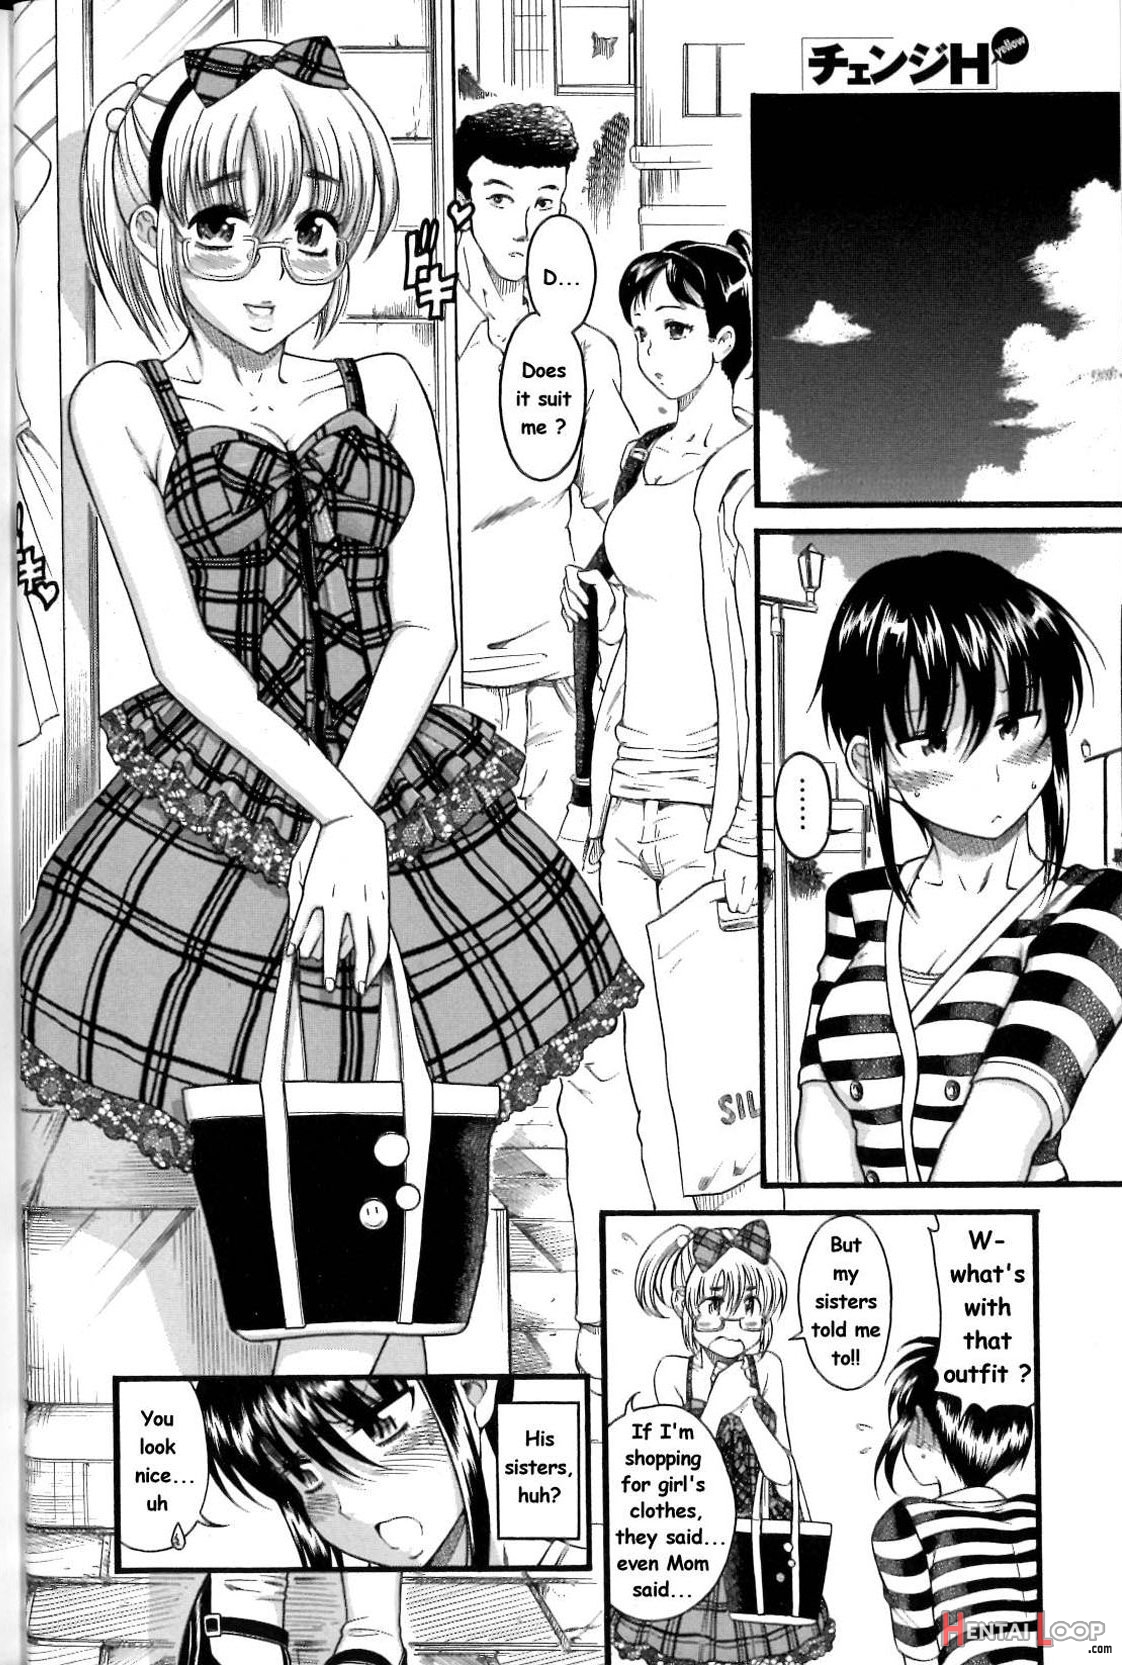 Boy Meets Girl, Girl Meets Boy 2- Single Page Version page 12